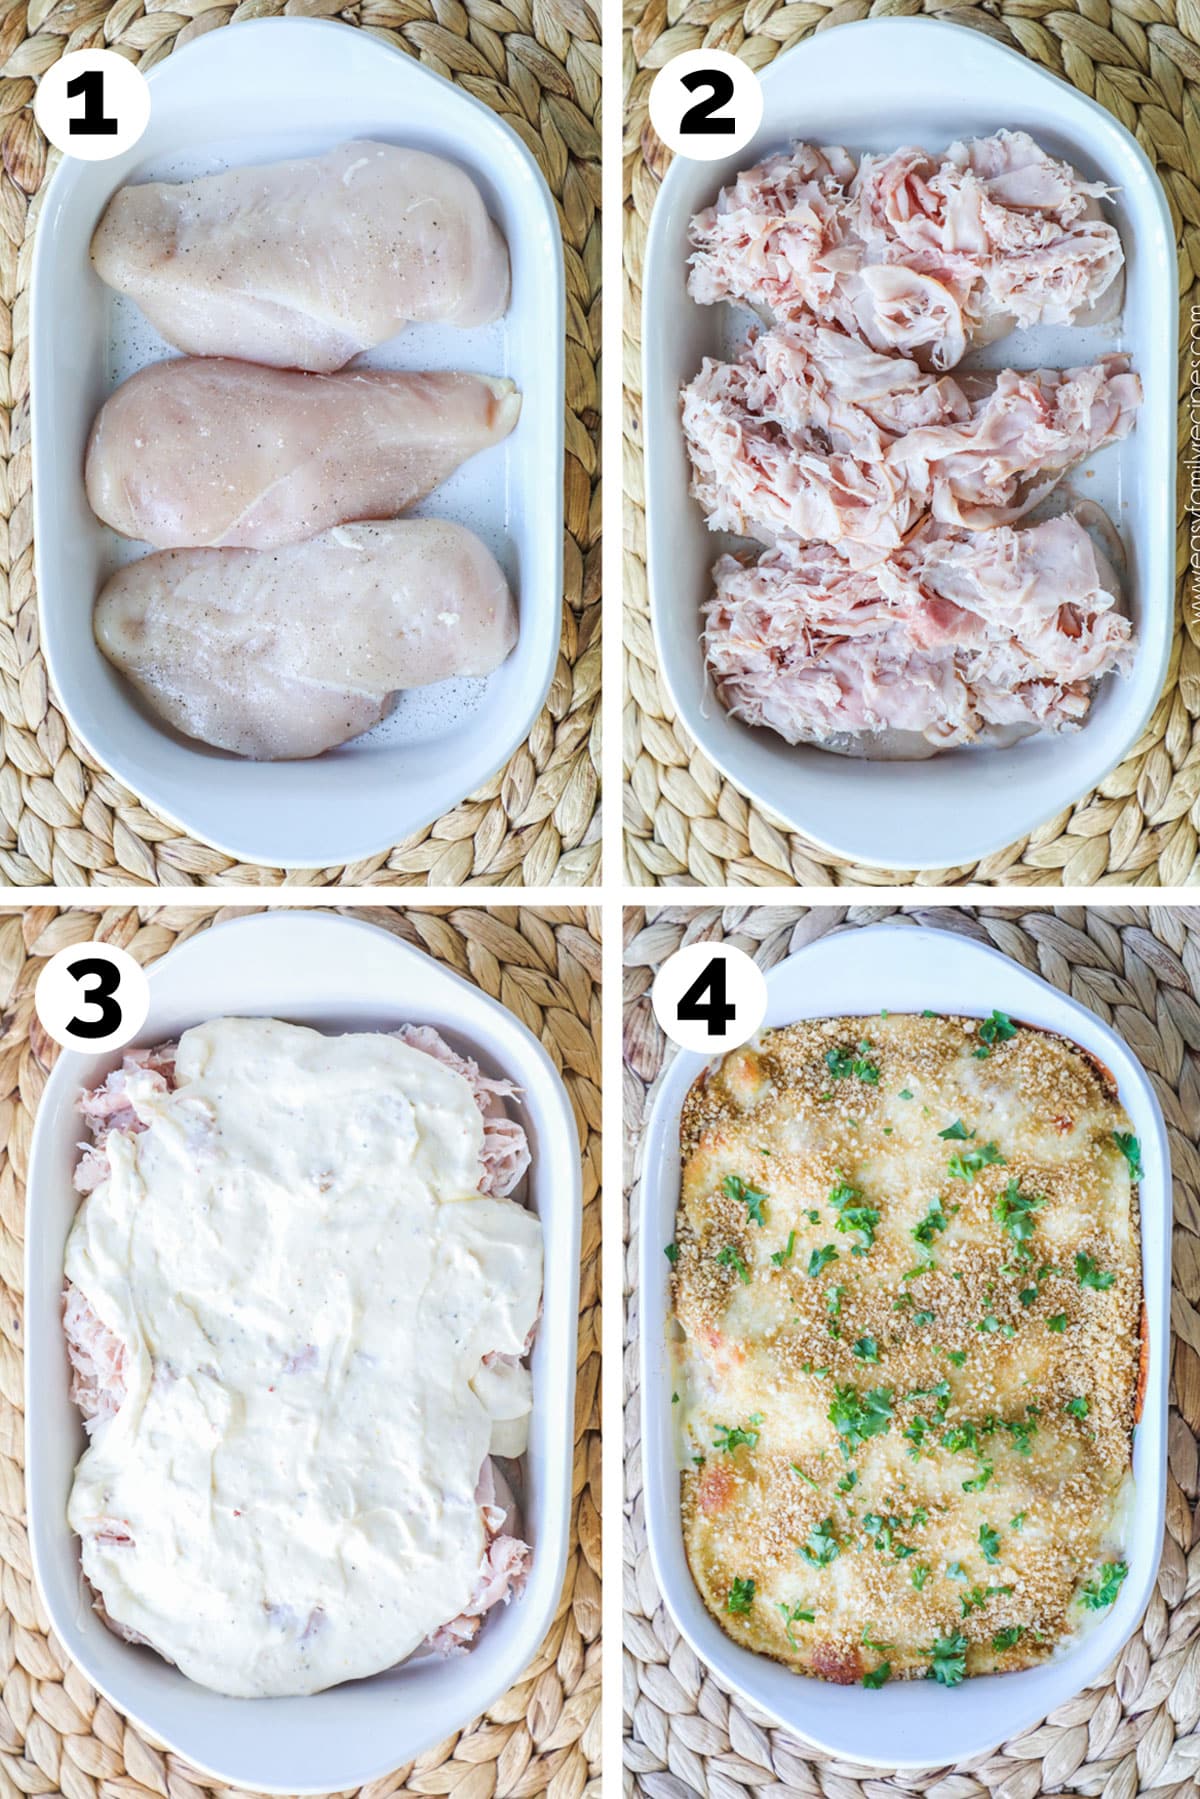 Process photos for how to make chicken cordon bleu casserole- 1. Lay chicken in a baking dish. 2. Cover with shaved ham. 3. mix sauce up and layer on top of the ham. 4. Finish with cheese and bread crumbs.